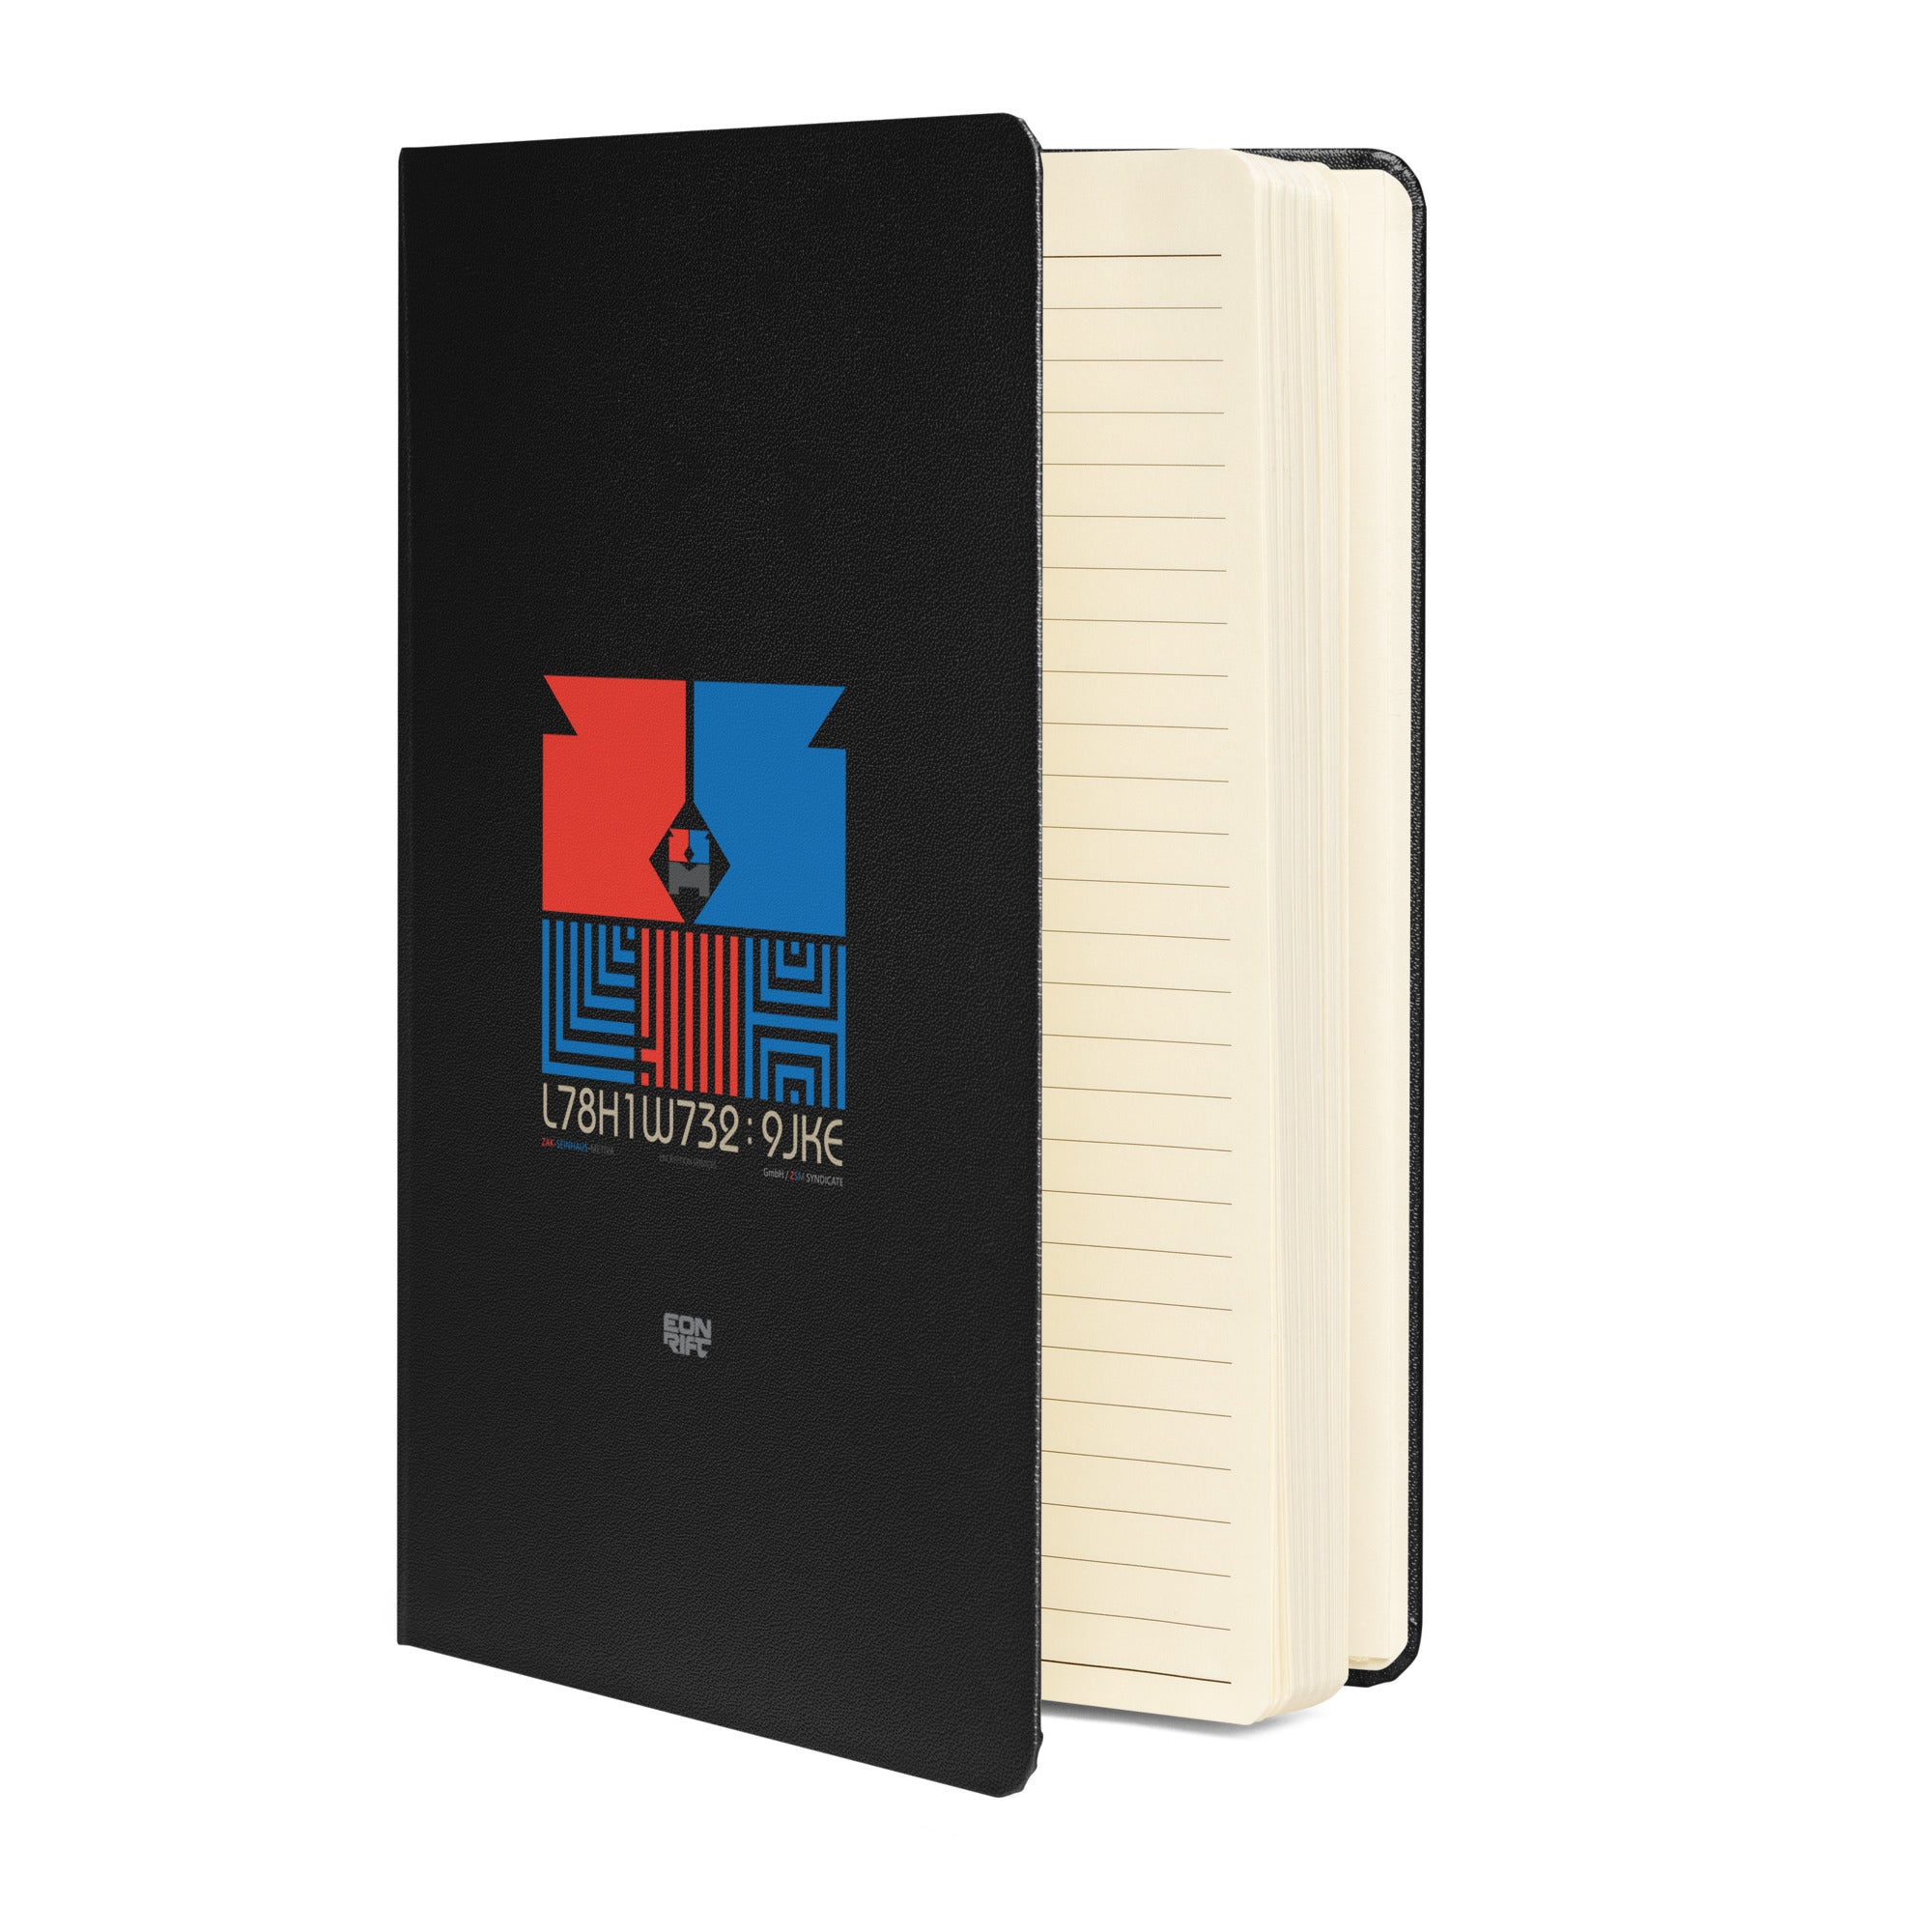 ZS | Hardcover bound notebook